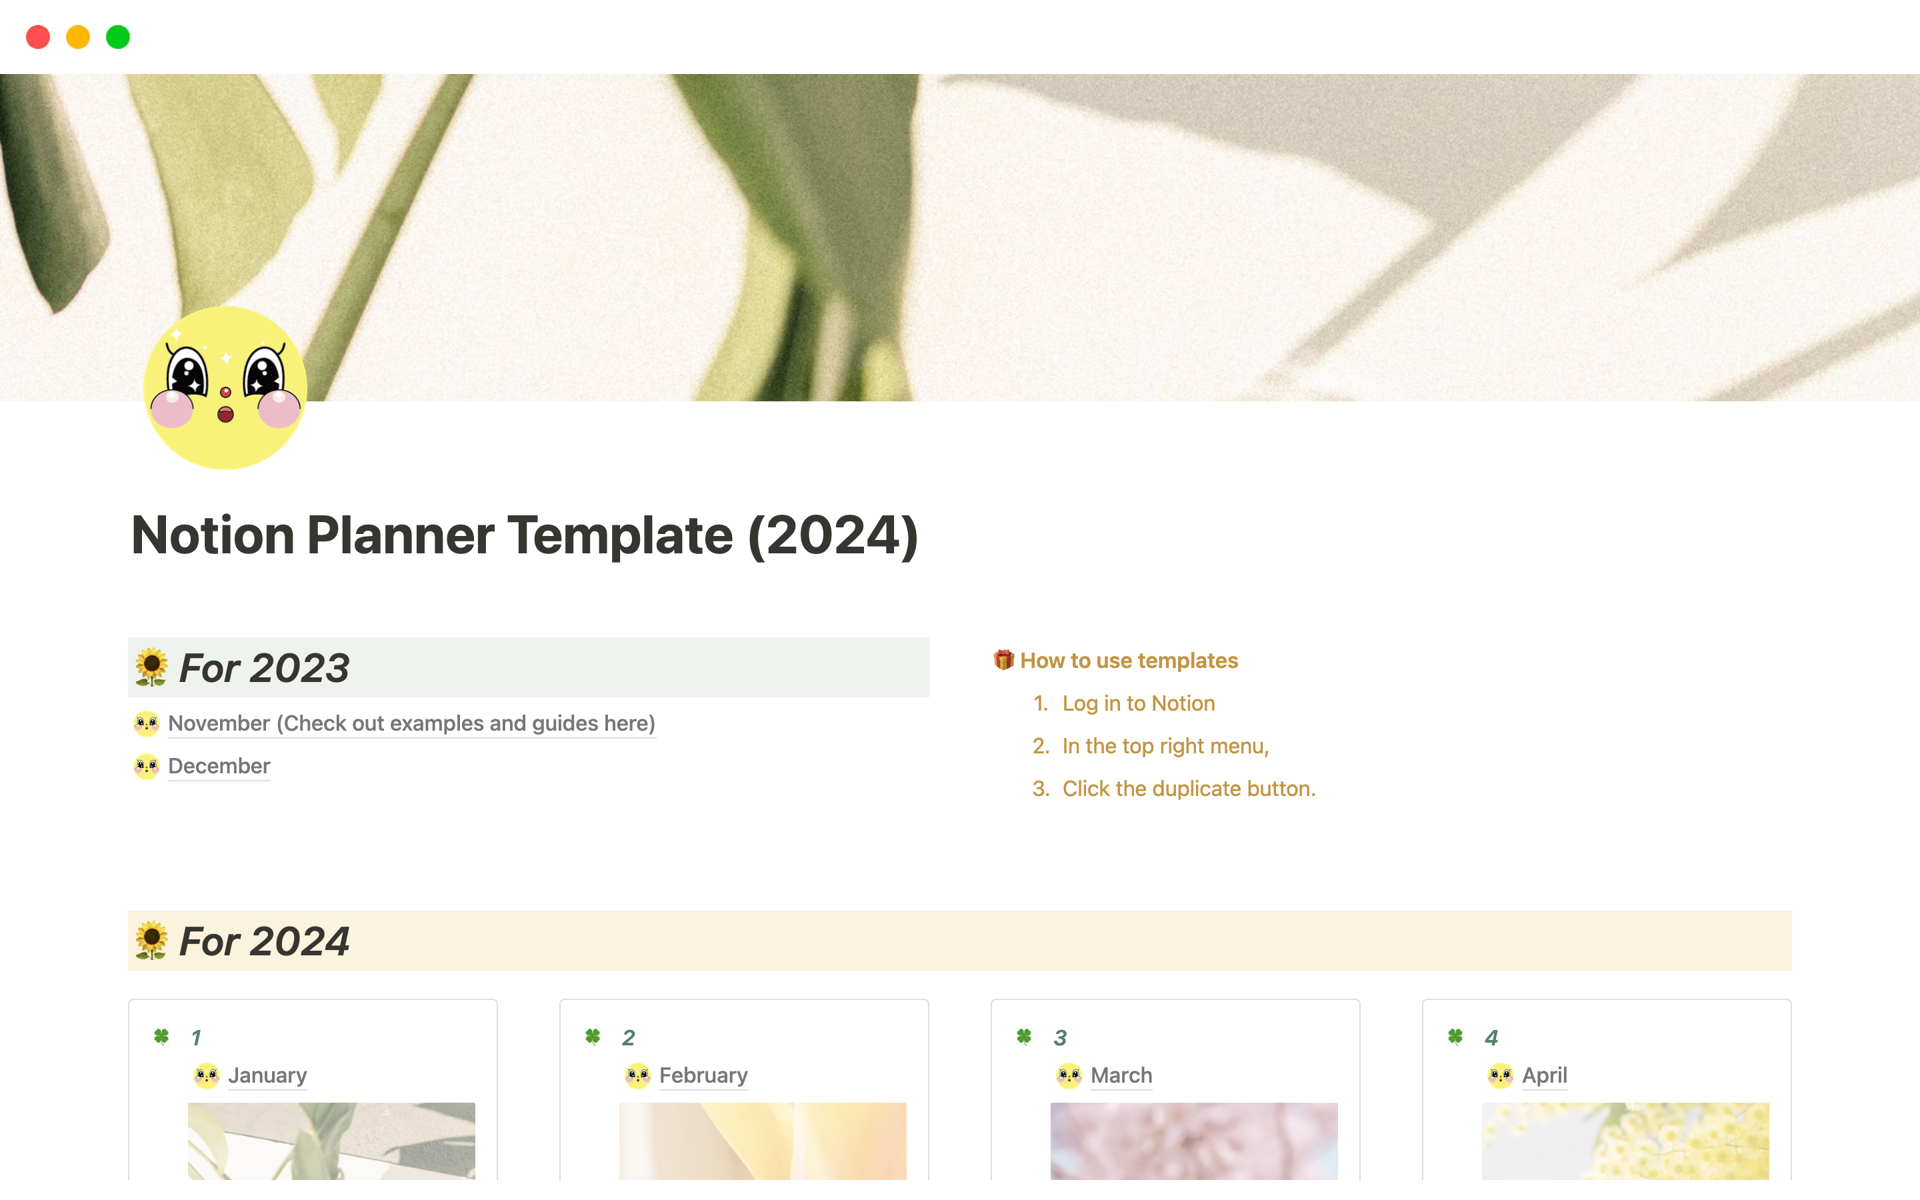 This Notion Planner Template has a variety of features to help you plan systematically and be more productive.